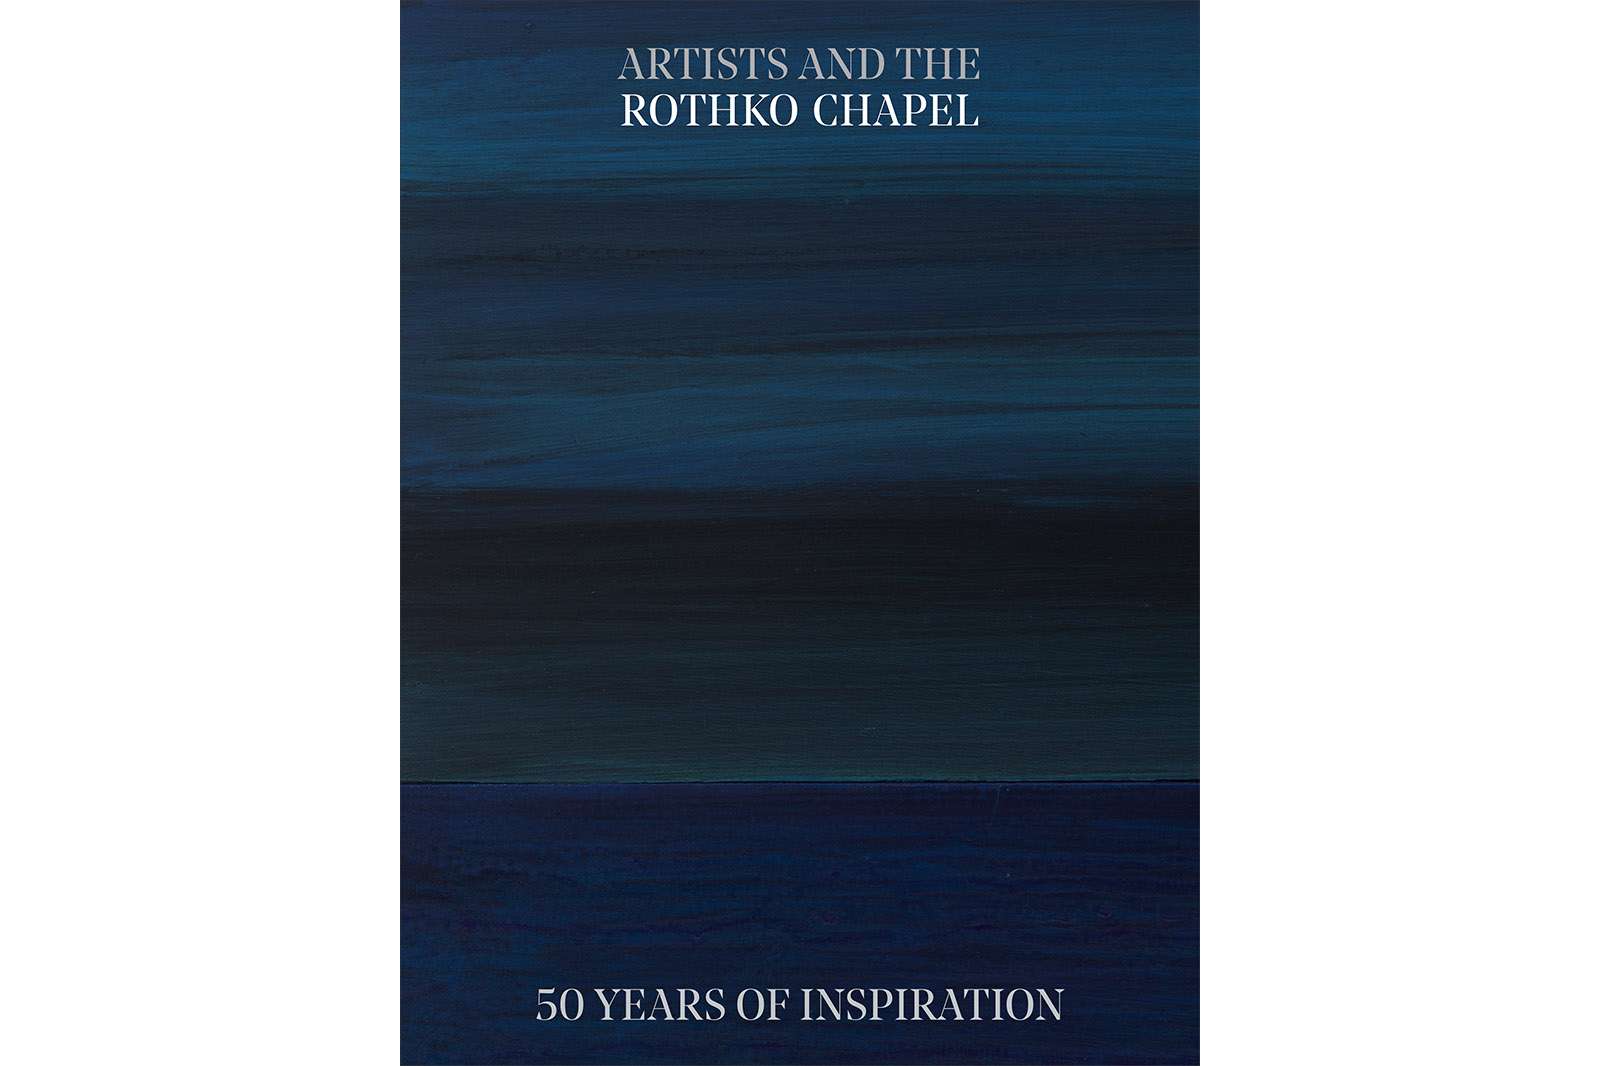 Artists and the Rothko Chapel: 50 Years of Inspiration. Edited by Frauke V. Josenhans. Published by the Moody Center for the Arts, distributed by Yale University Press. (2021) 